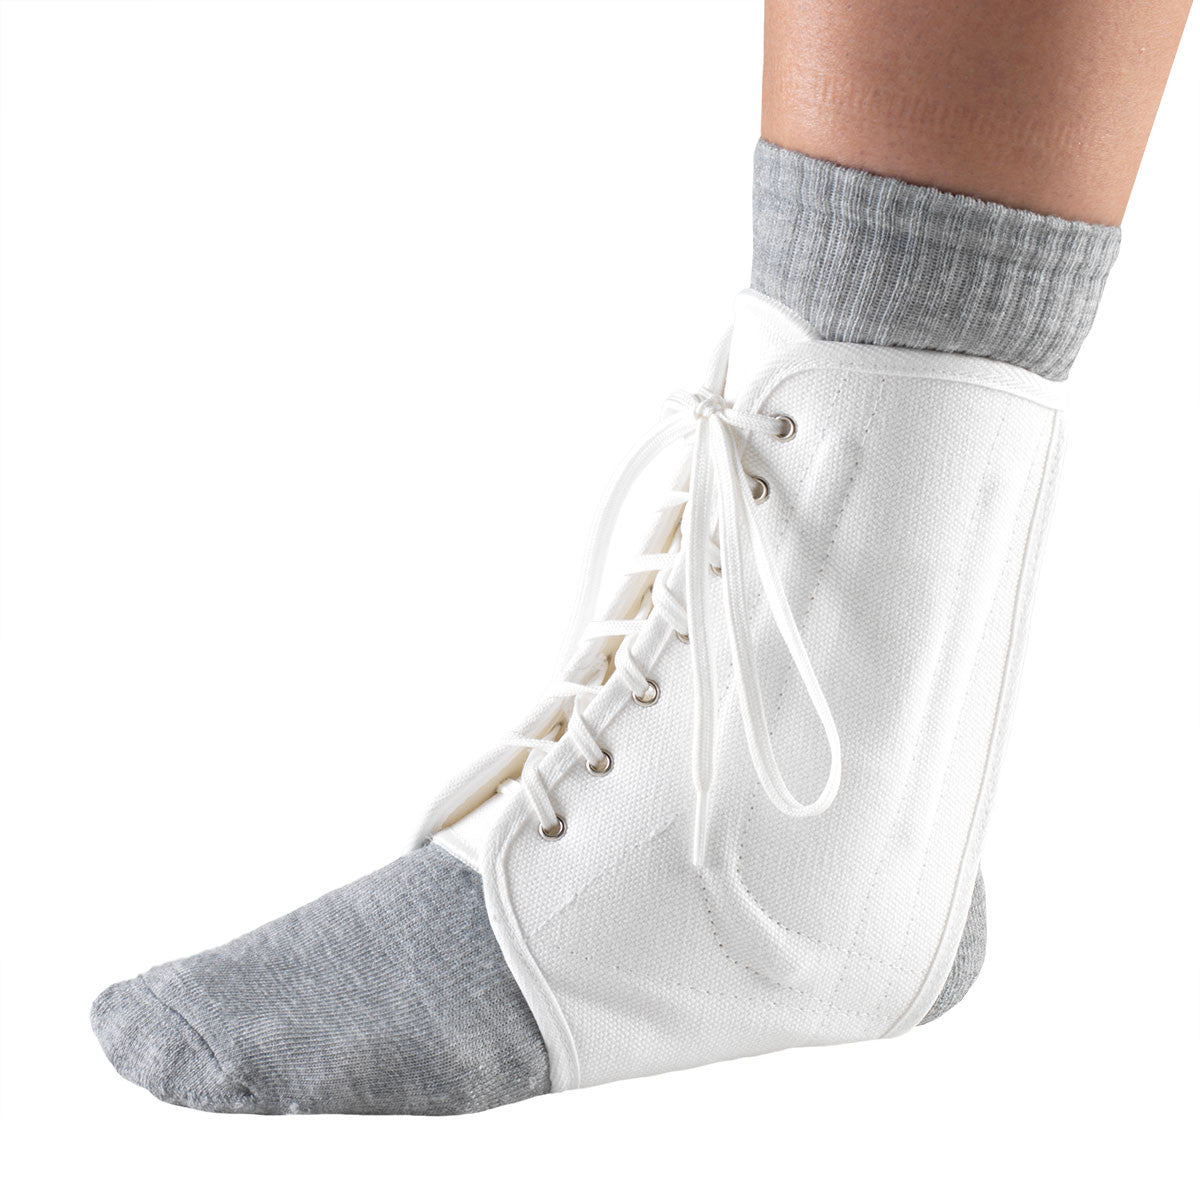 --Side of HIGH PERFORMANCE ANKLE BRACE--